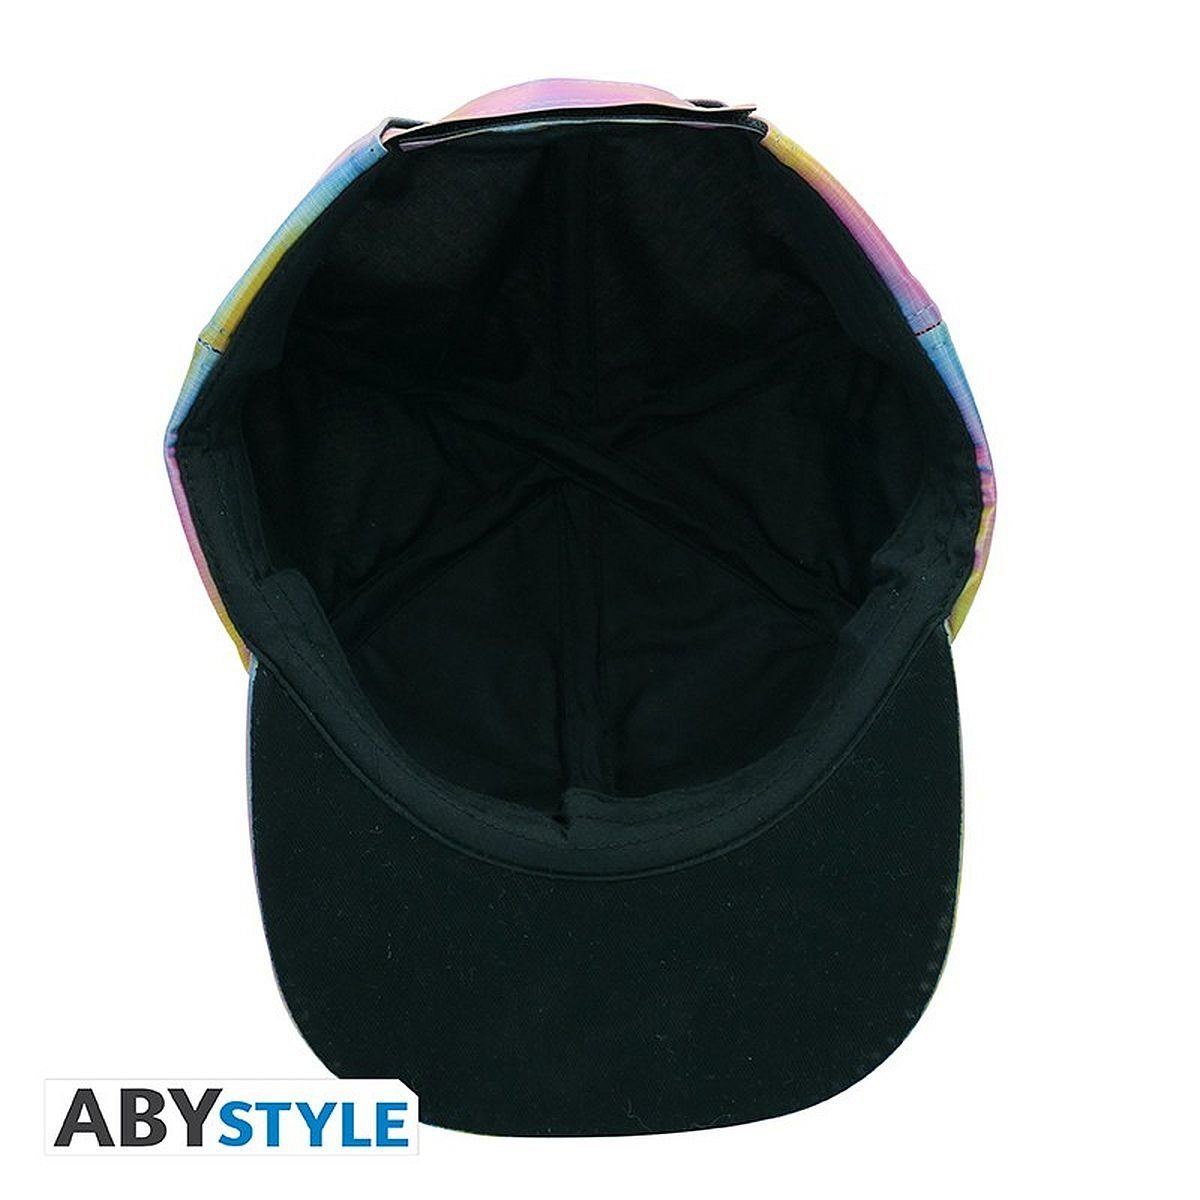 ABYstyle Flat Cap Zukunft McFly Zurück Cap Future die to Marty Back the in